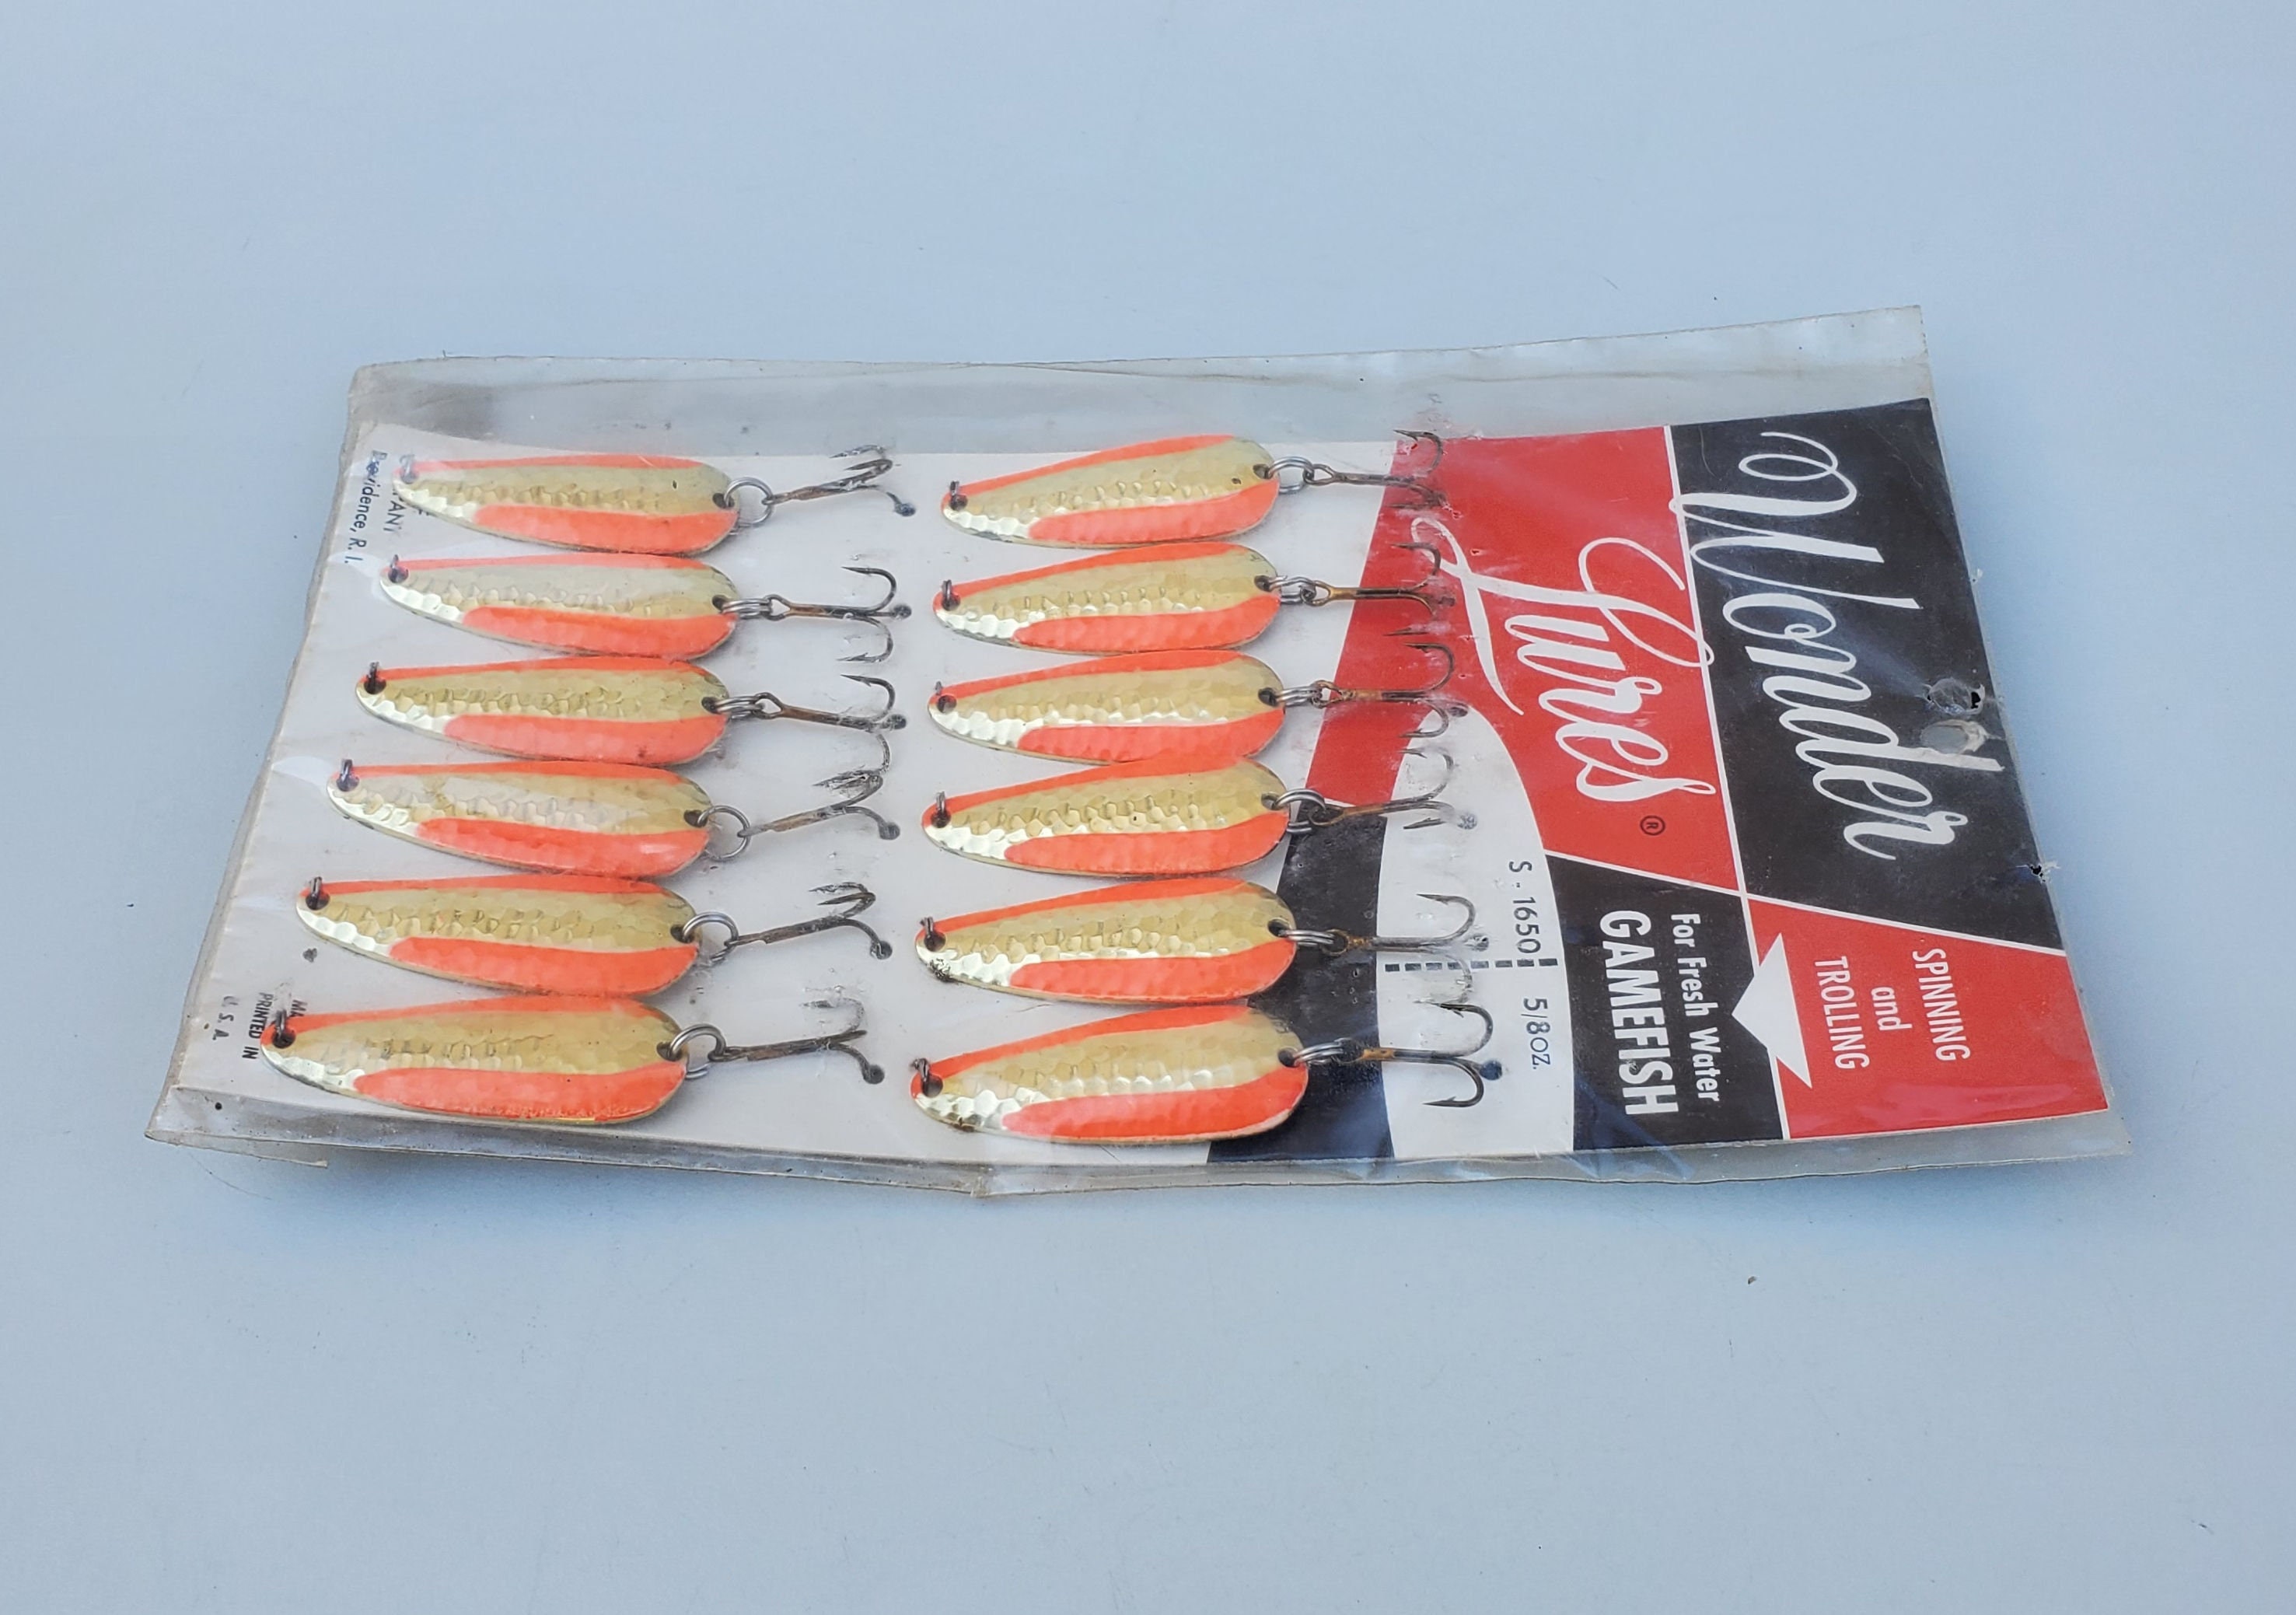 Vintage Wonder Lures Dealer Display Card Acme Tackle Co Orange and Brass  Hammered Finish 5/8 Ounce Lure Display 1970's Era Lures -  Hong Kong